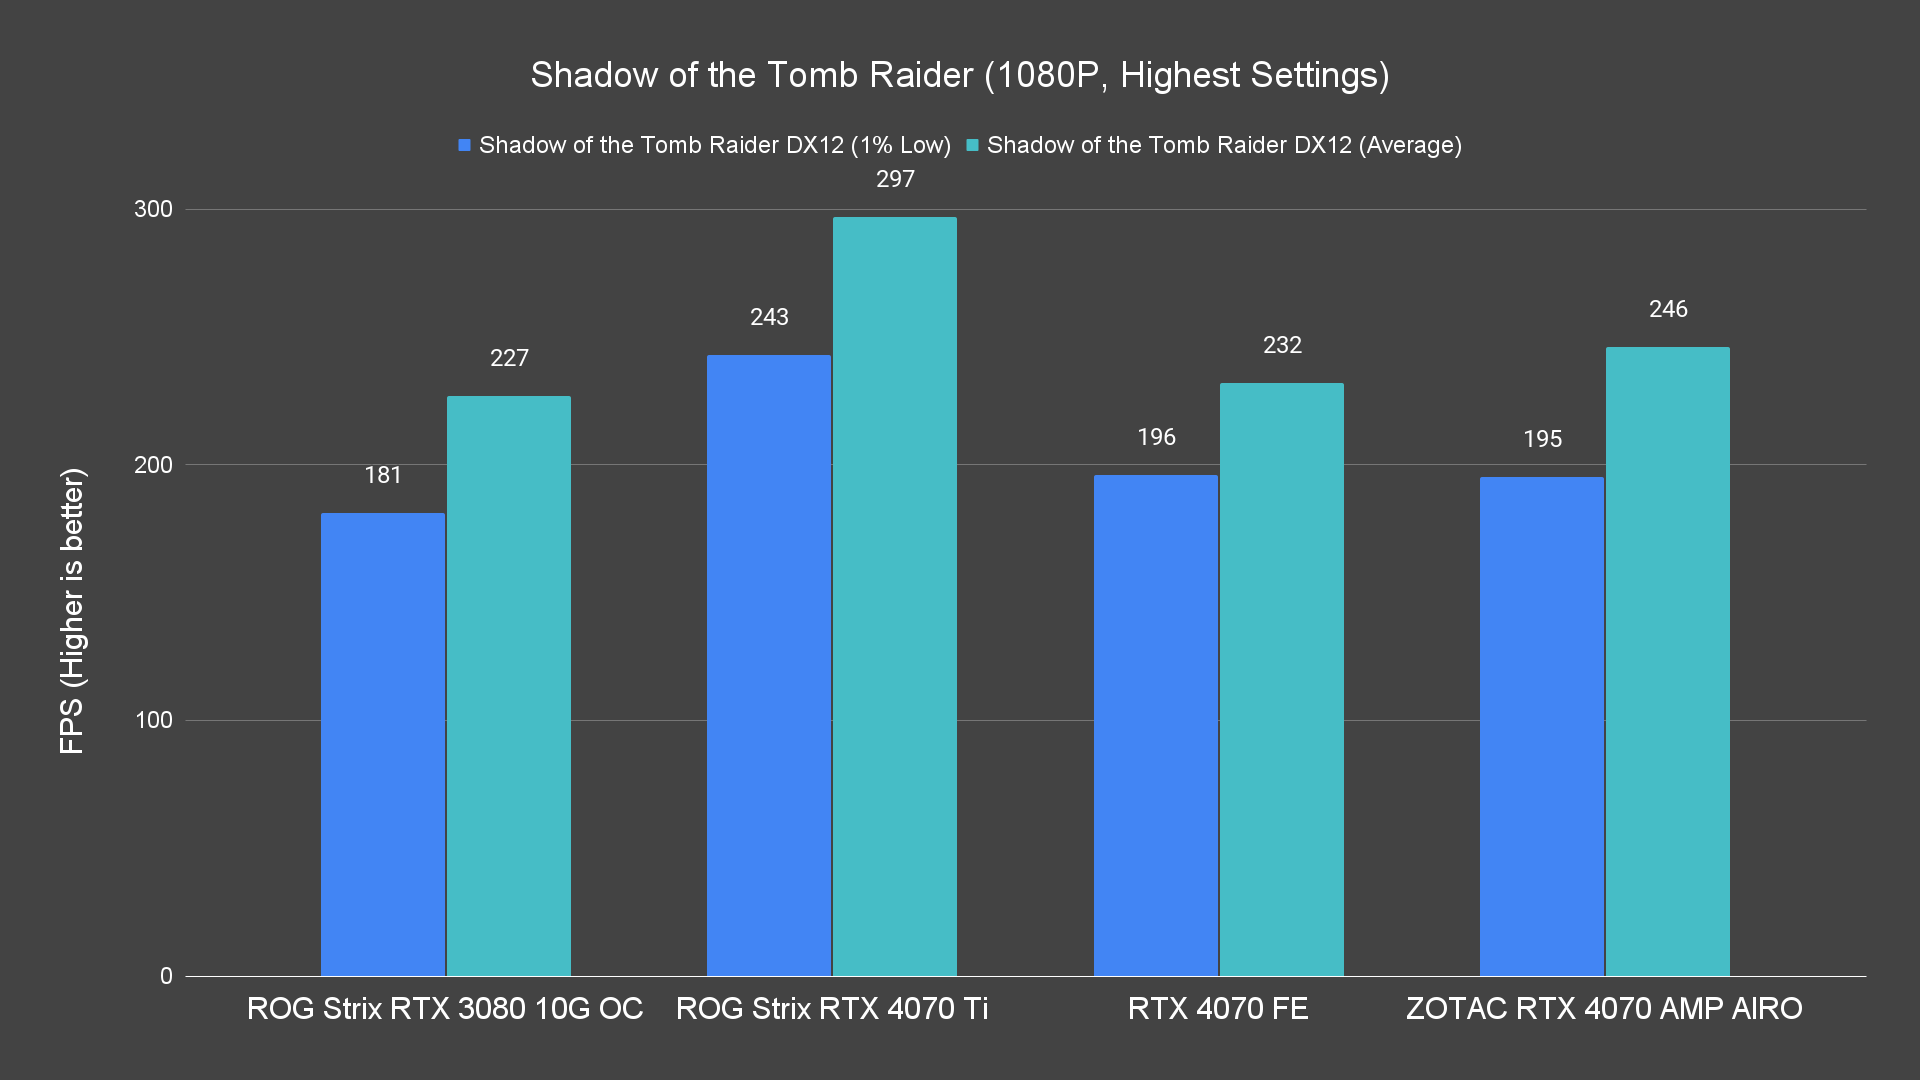 Shadow of the Tomb Raider 1080P Highest Settings 7